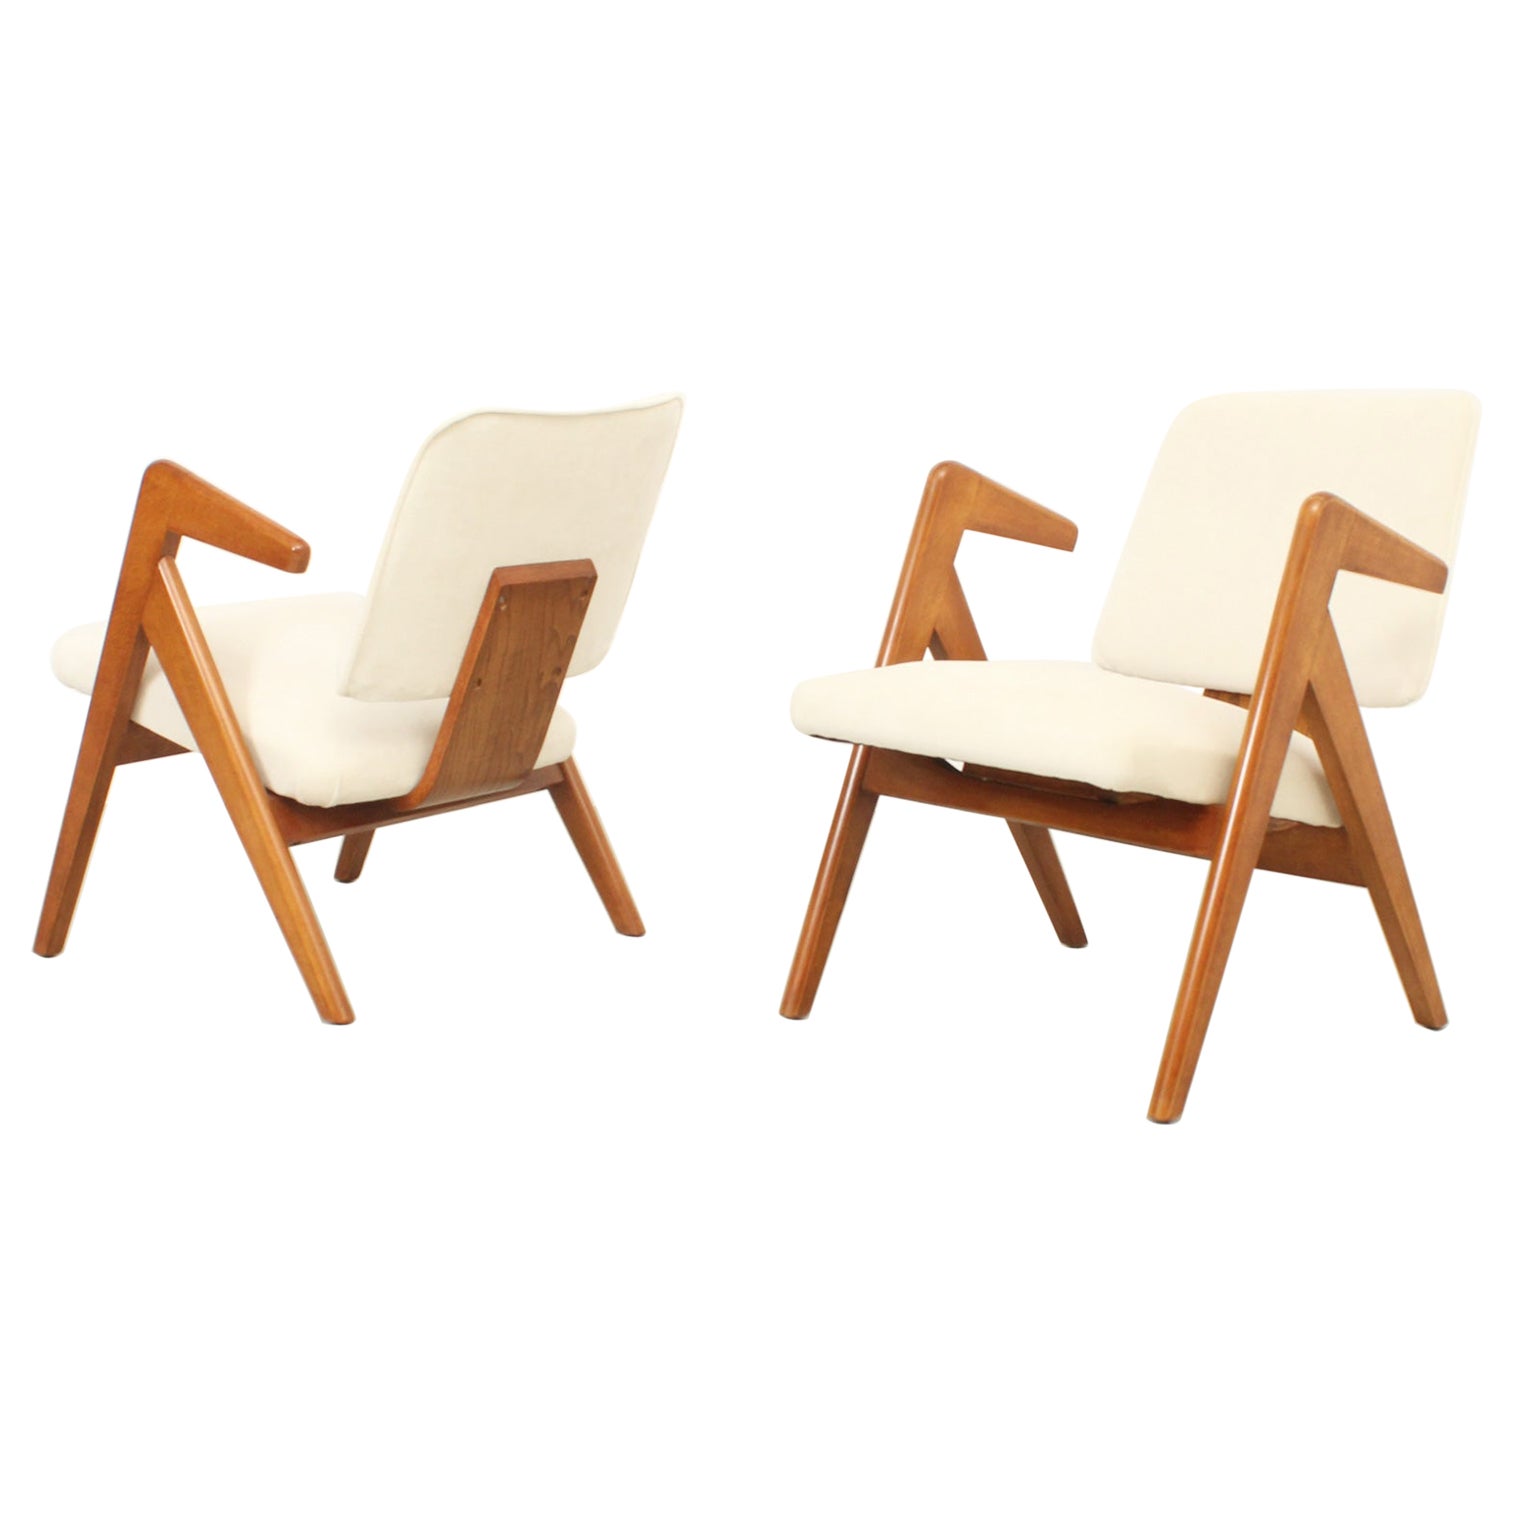 Pair of Hillestak Armchairs by Robin Day, UK, 1950s